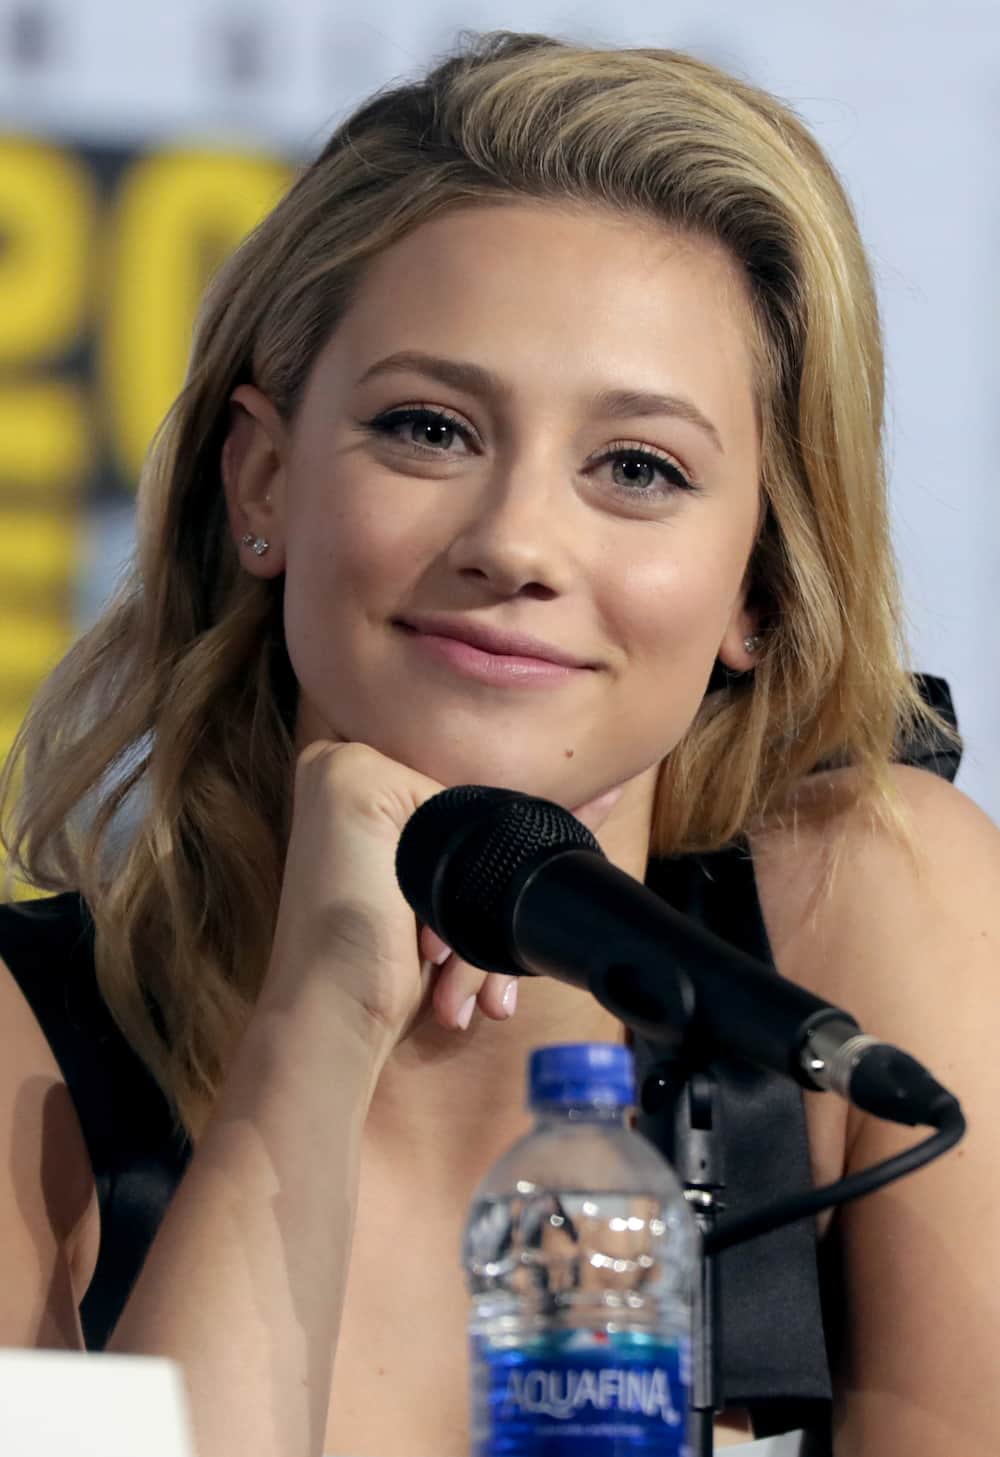 Riverdale actress Lili Reinhart reacts after imposter poses as her on interview